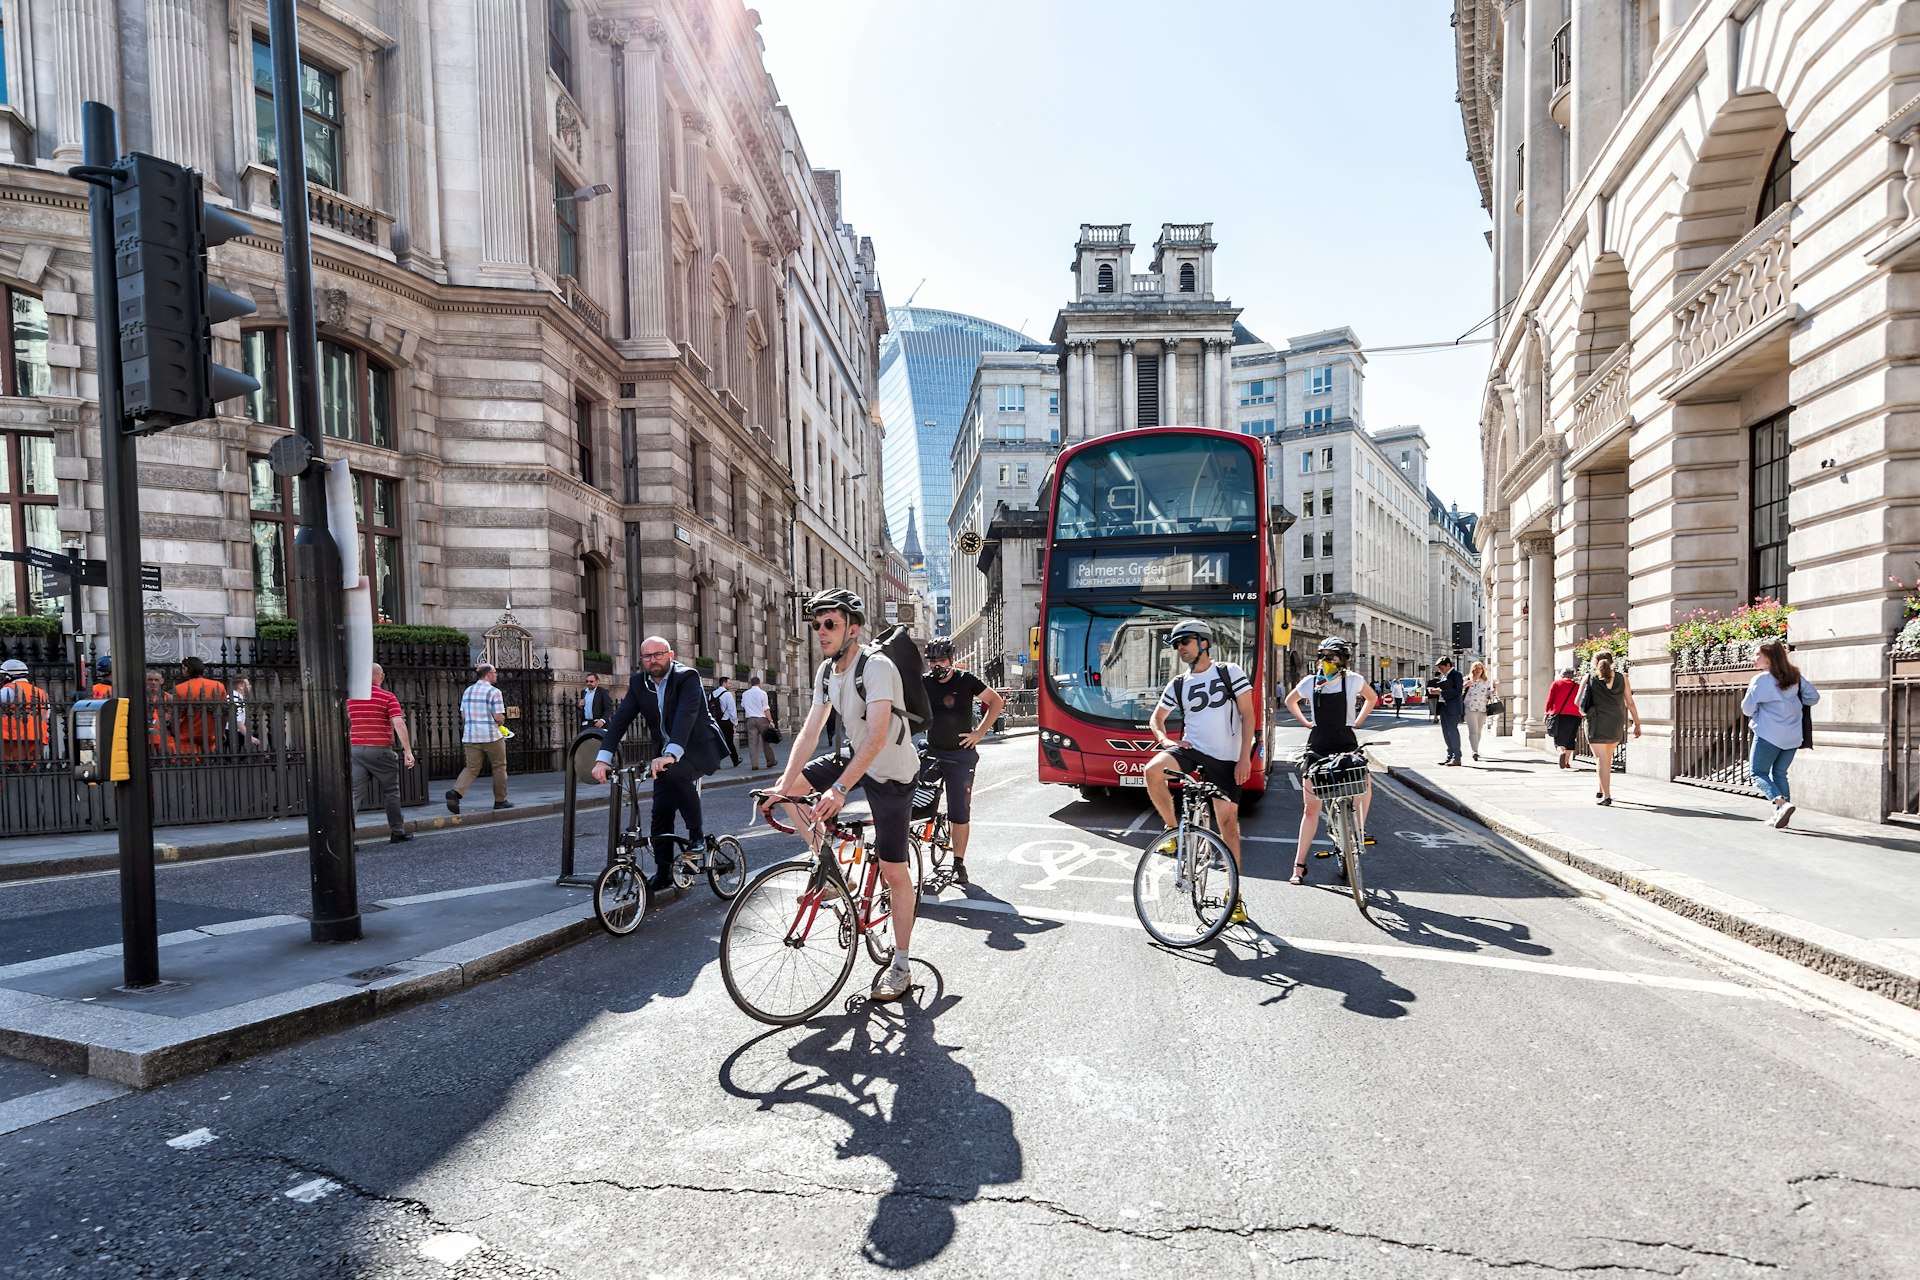 Several cyclists stop at a red light with a double-decker bus behind on a street in the City, London, England, United Kingdom